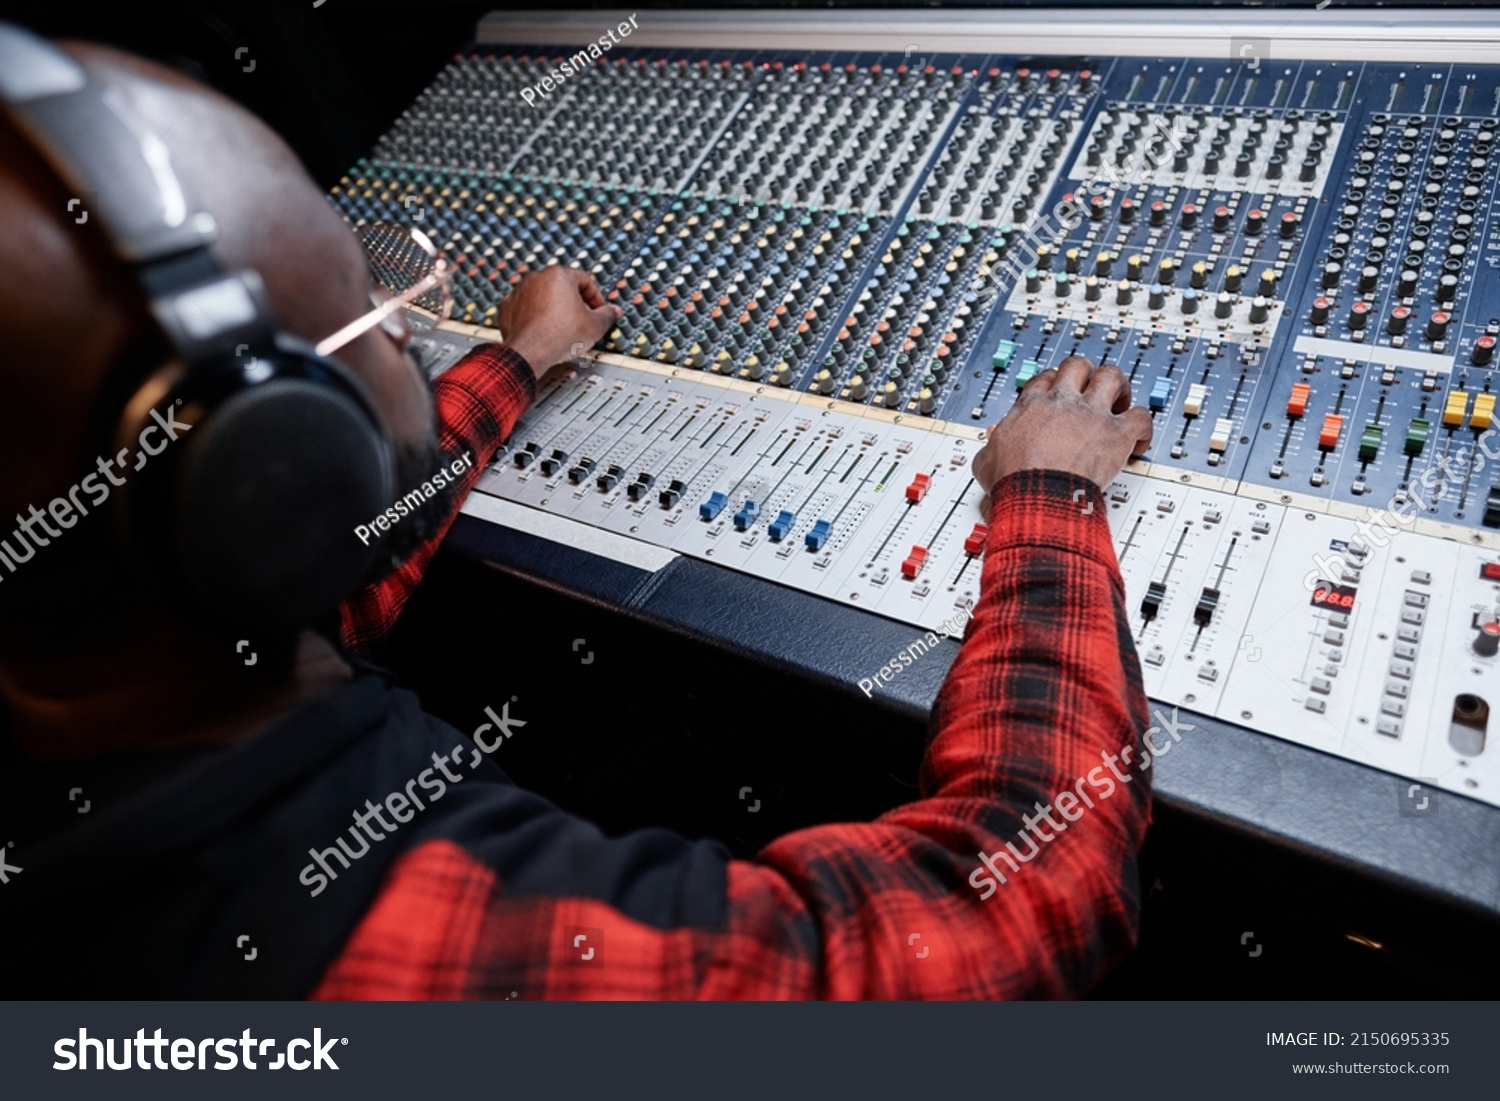 Professional sound engineer producing recording in studio adjusting sound settings at mixing console #2150695335